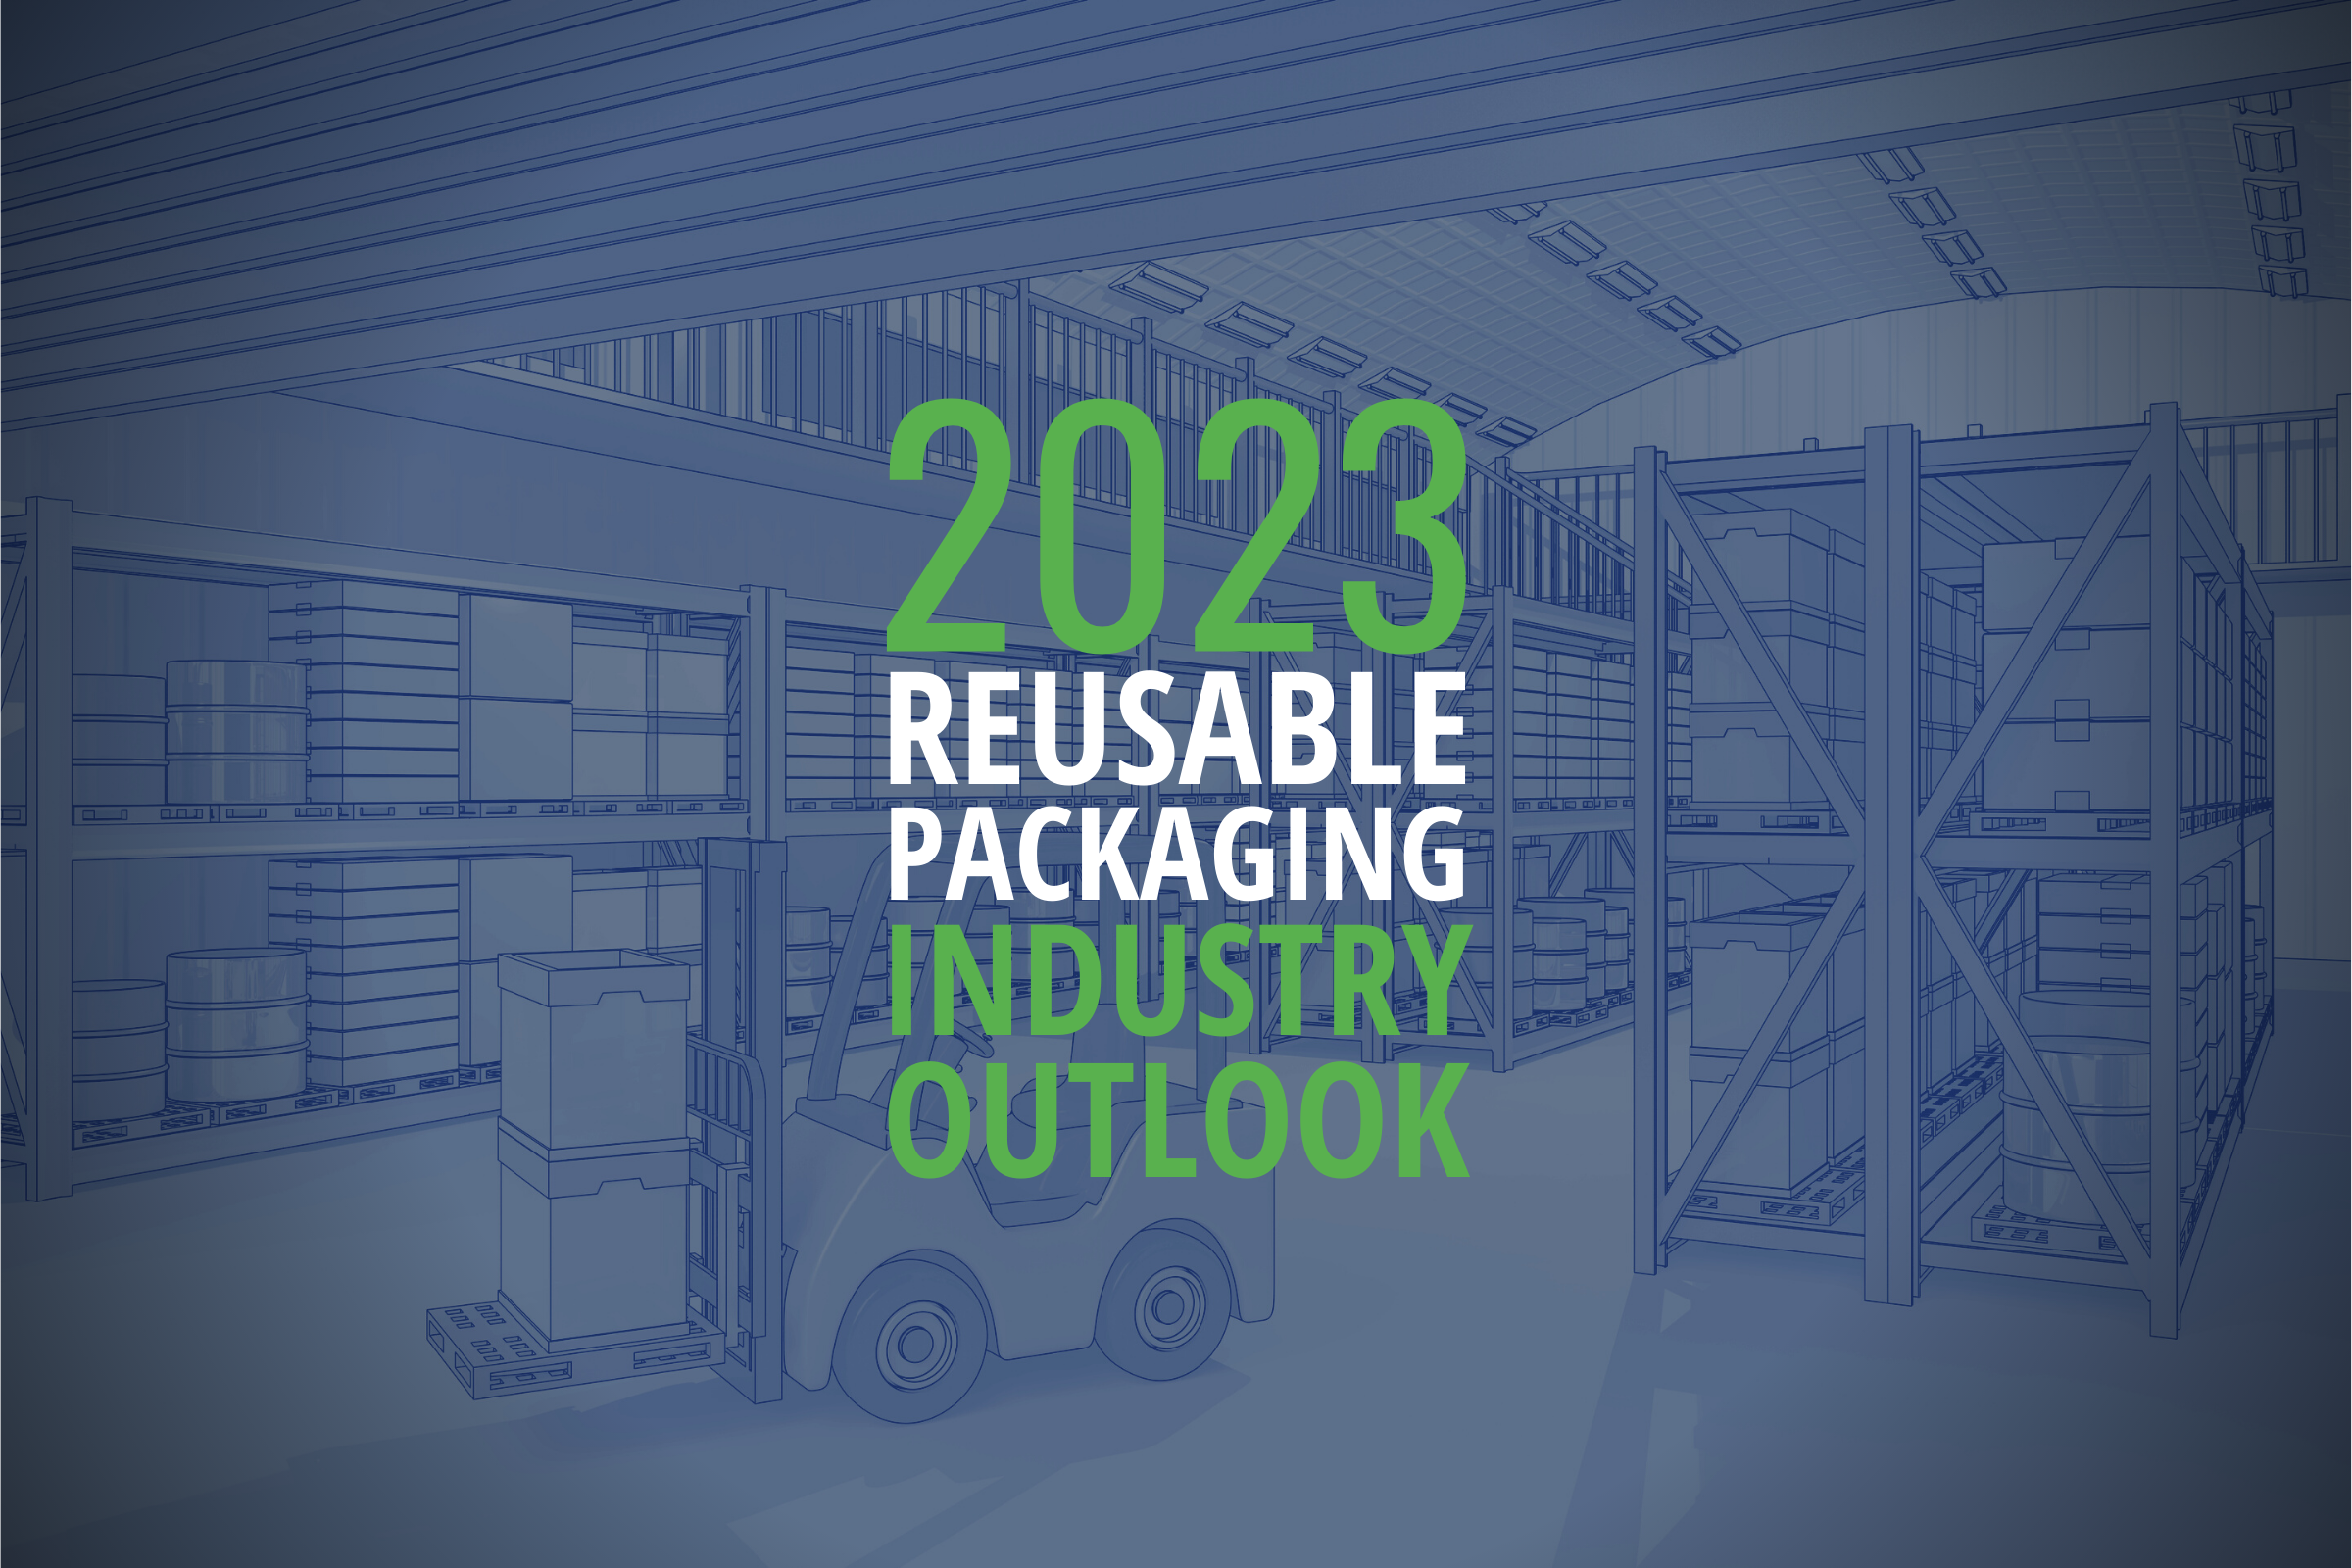 2023 Reusable Packaging Industry Outlook: Why Reusable Packaging for Supply Chains is Business Critical Today